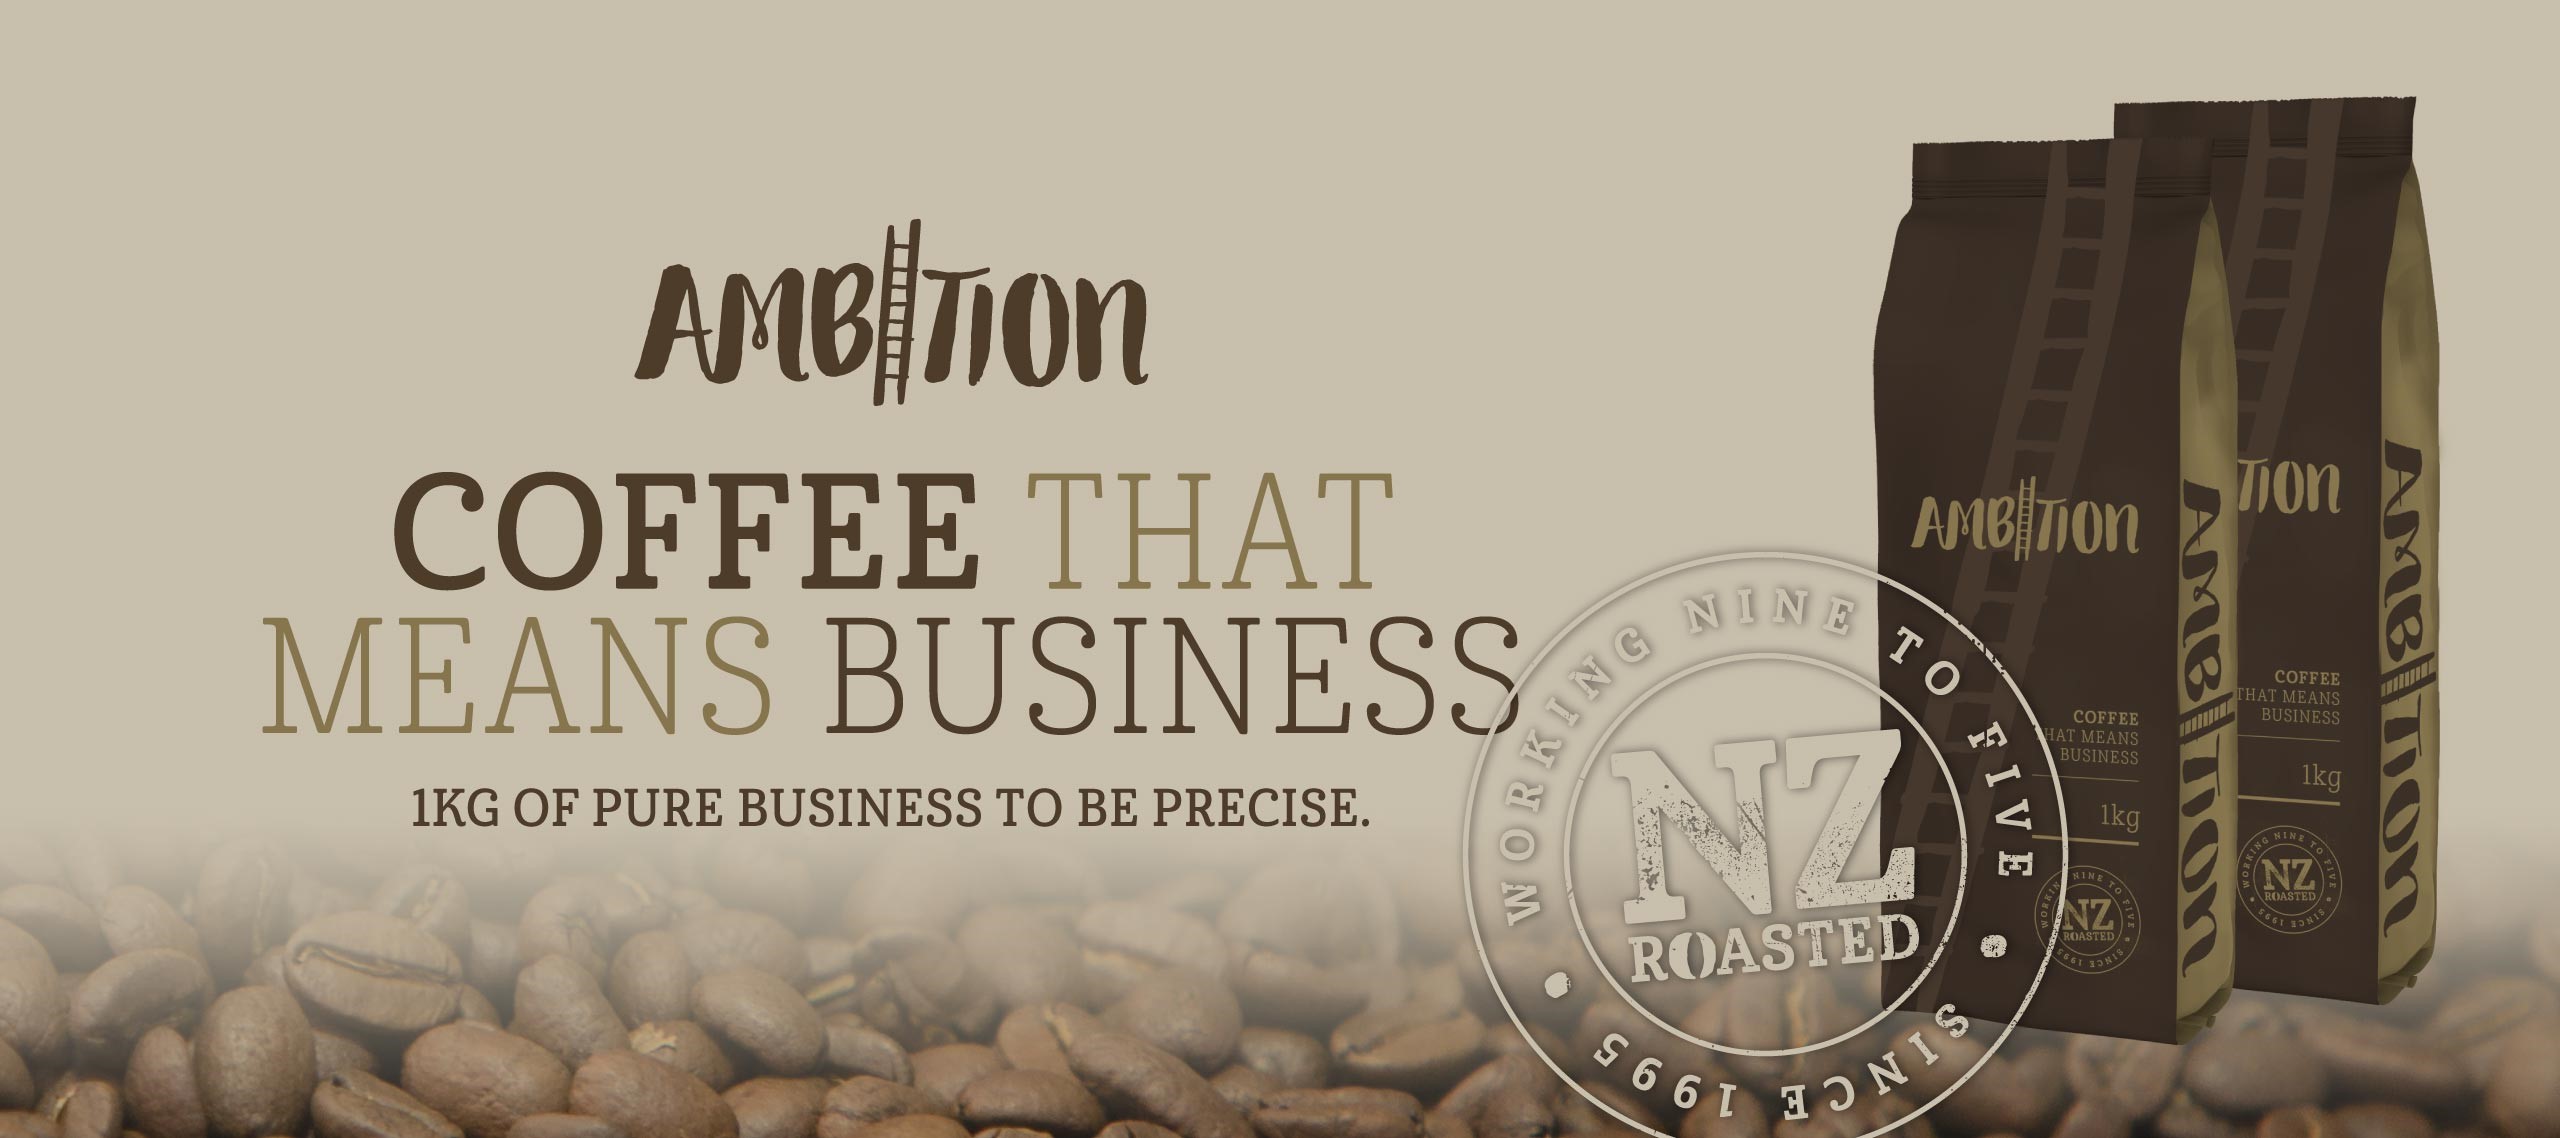 Ambition coffee beans